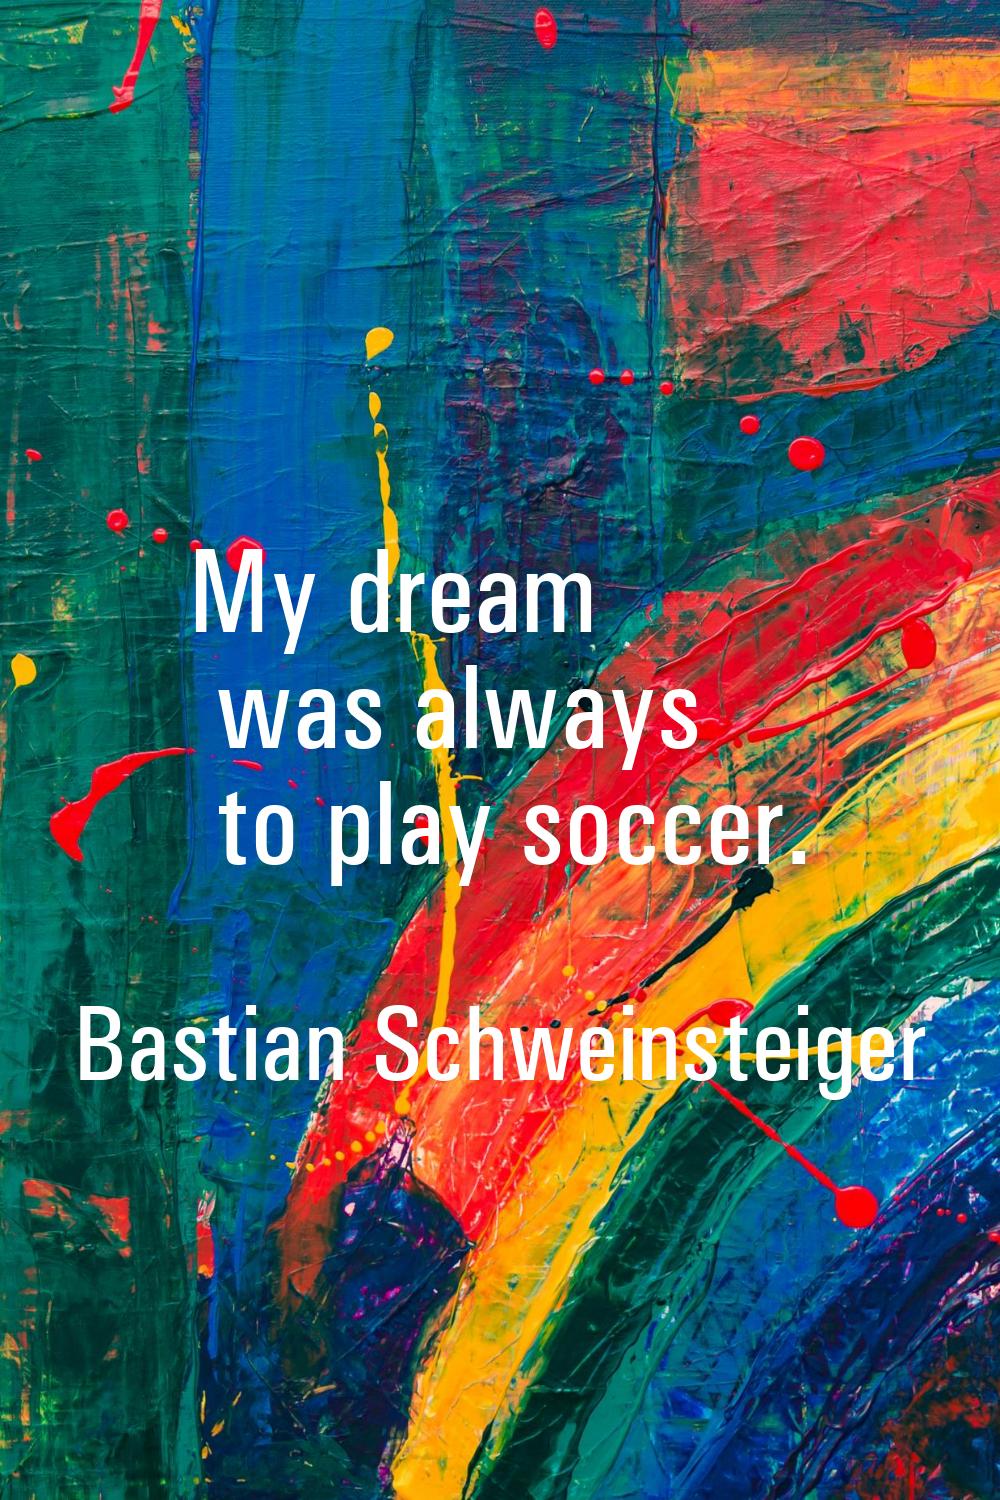 My dream was always to play soccer.